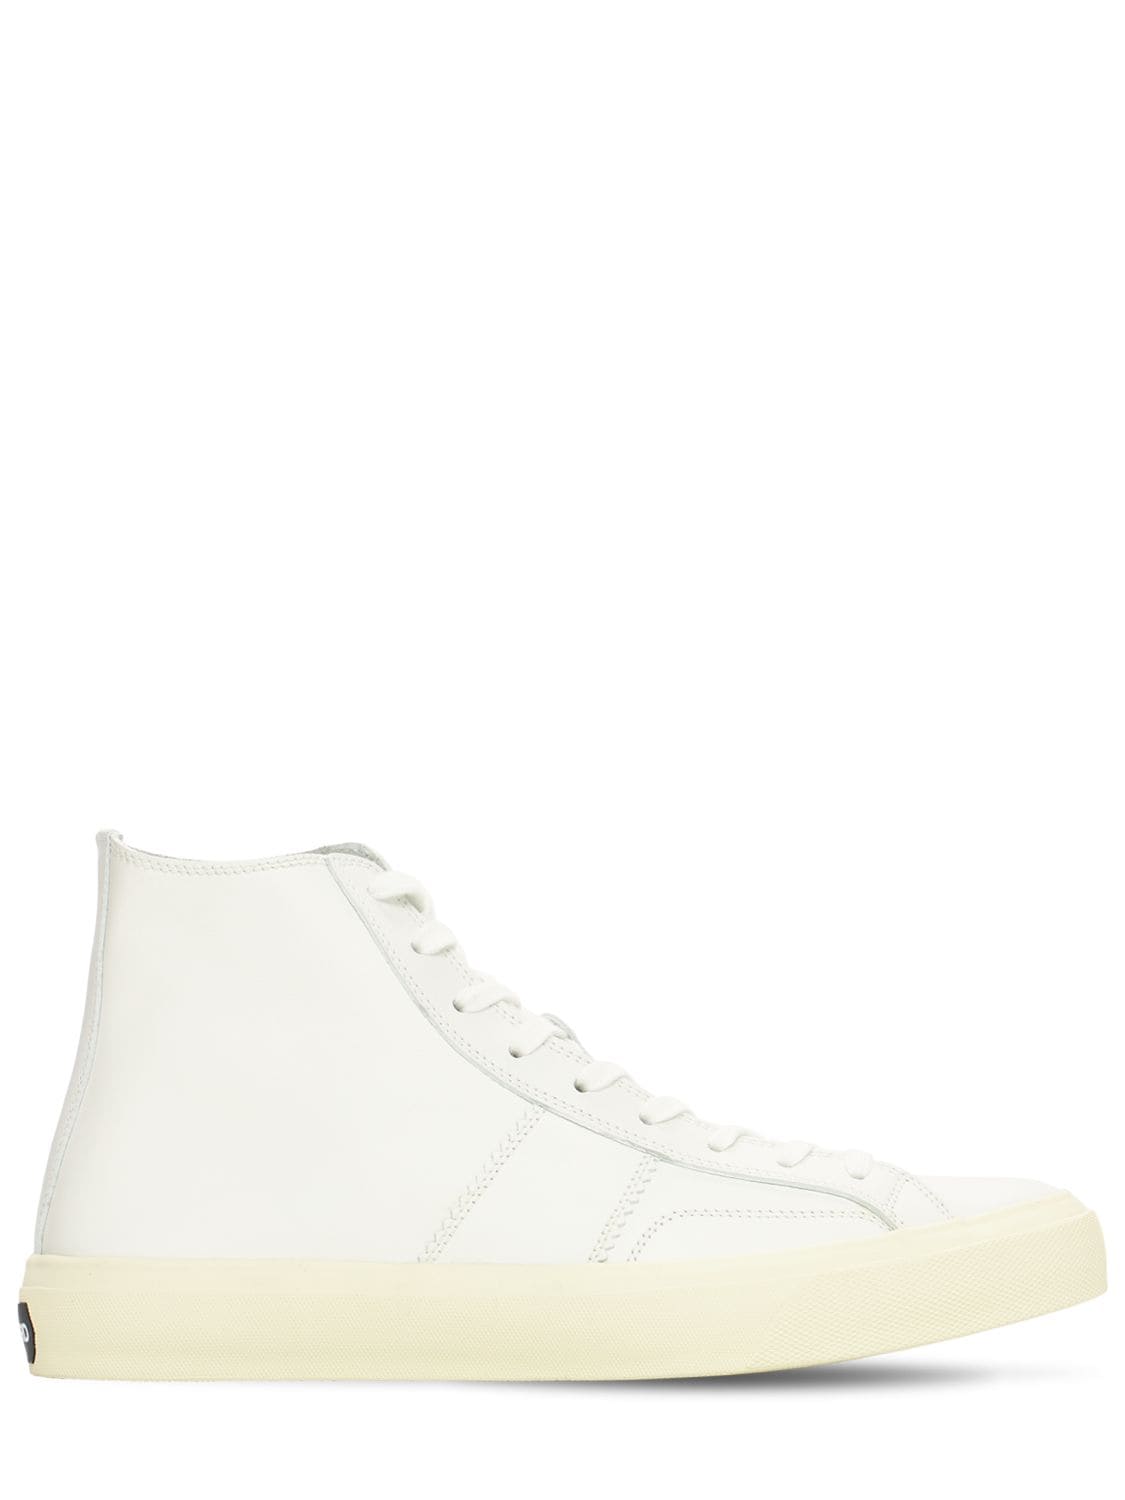 Leather High Top Sneakers - TOM FORD - Modalova